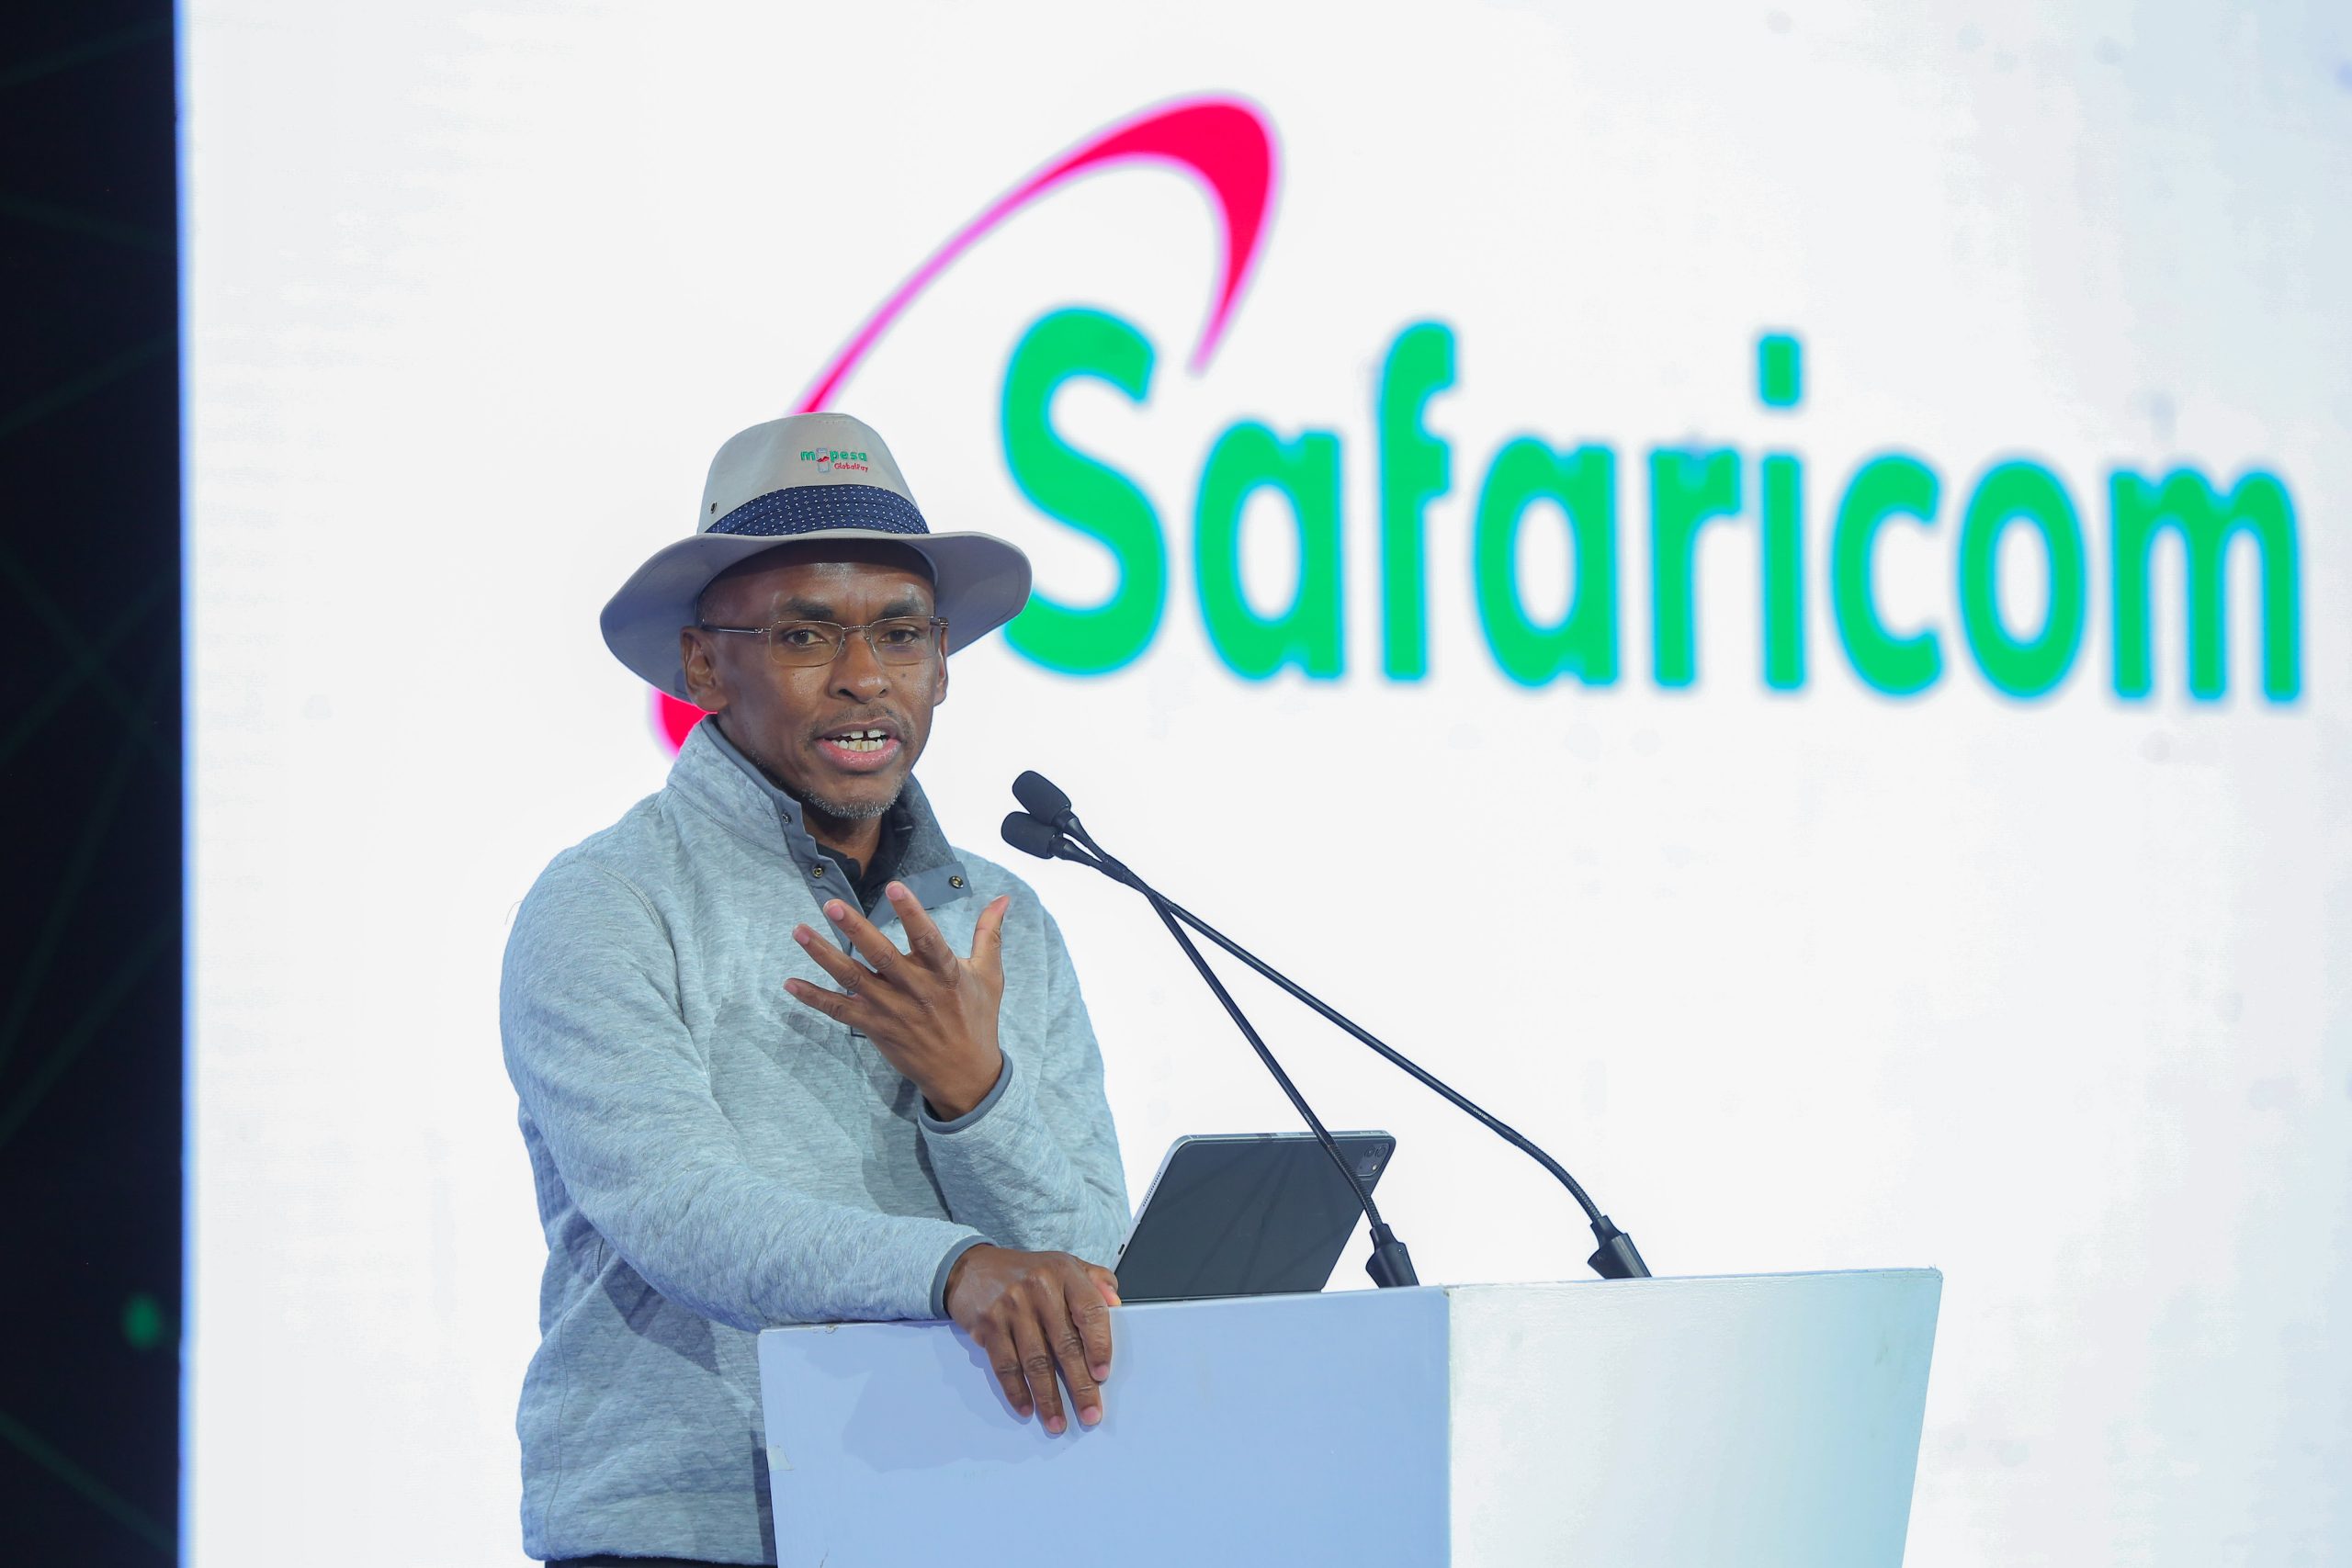  Safaricom in deal to connect persons with disabilities with employers